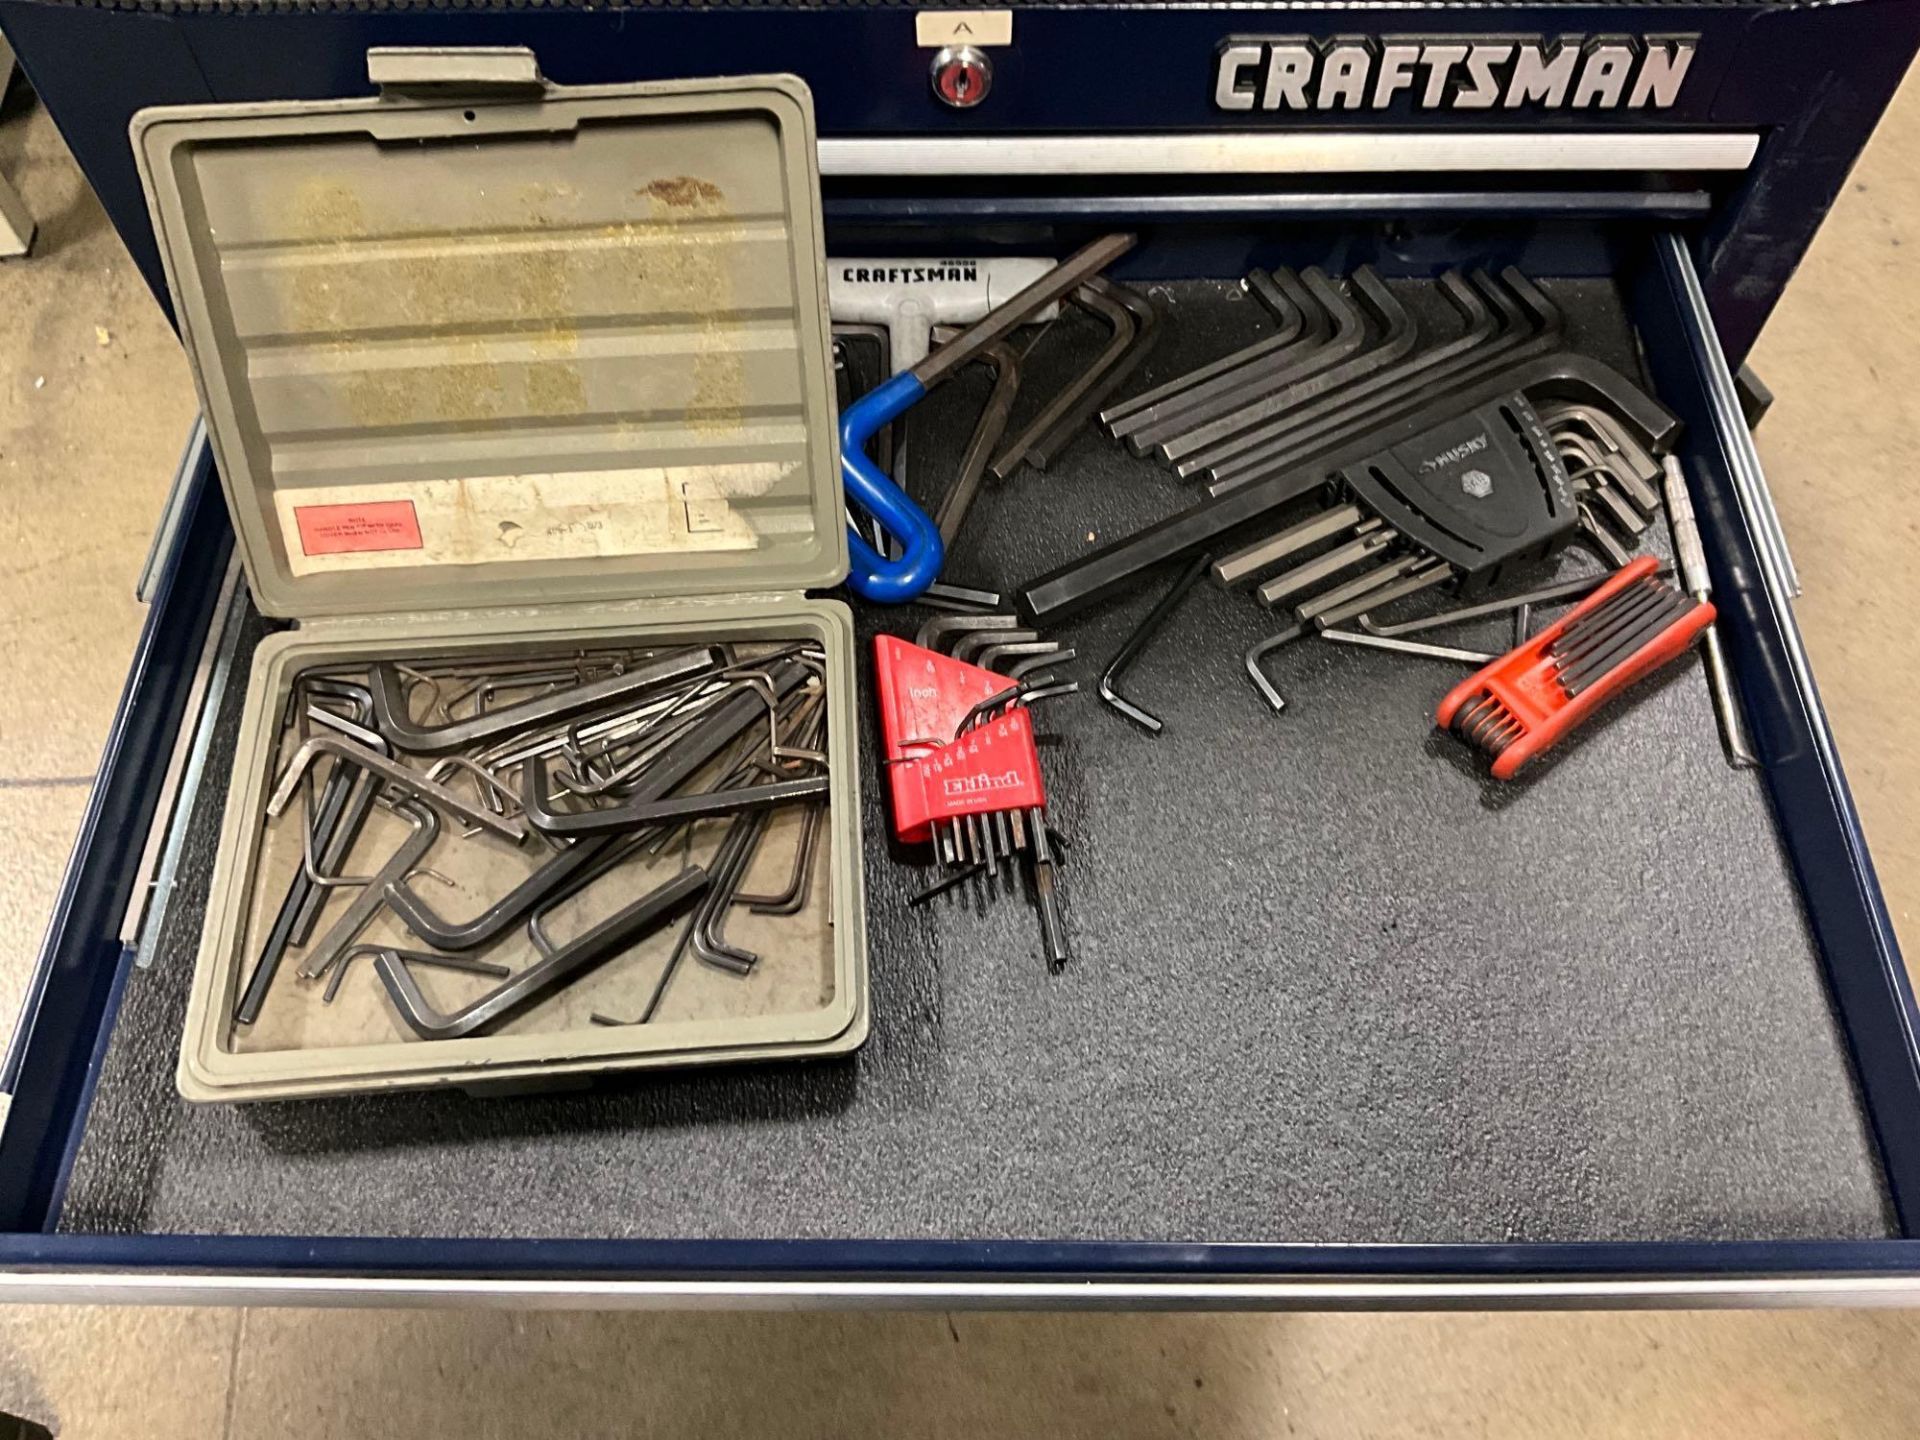 CRAFTSMAN TOOLBOX LOADED WITH TOOLS - Image 13 of 21